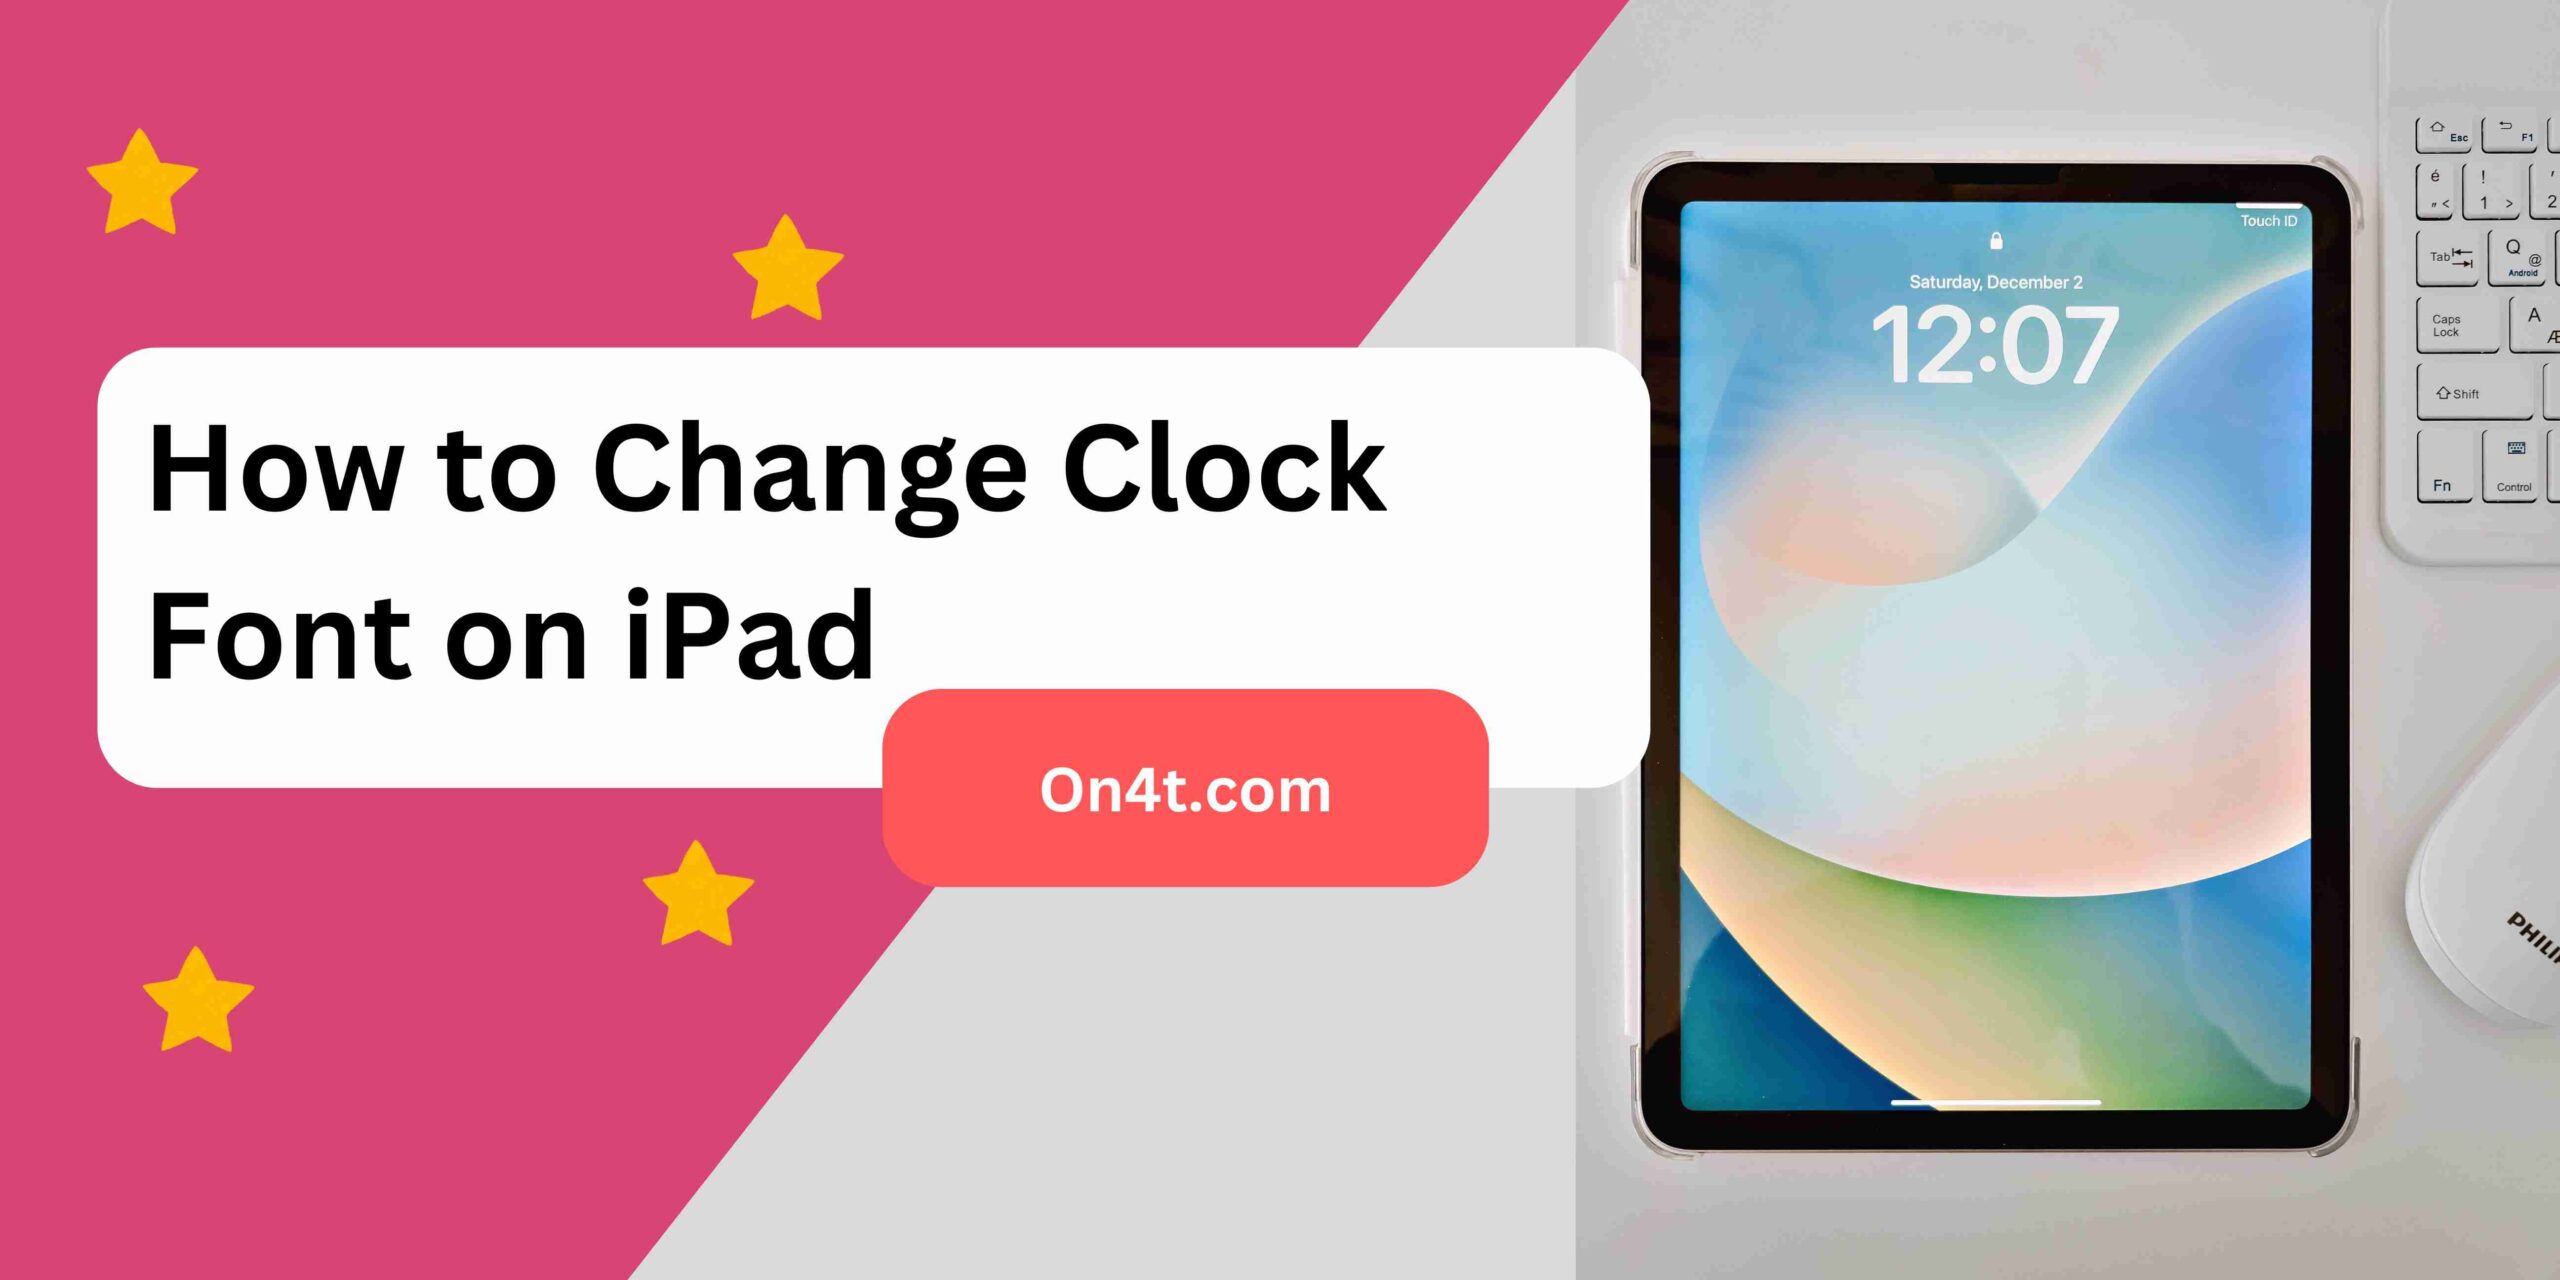 How to Change Clock Font on iPad?